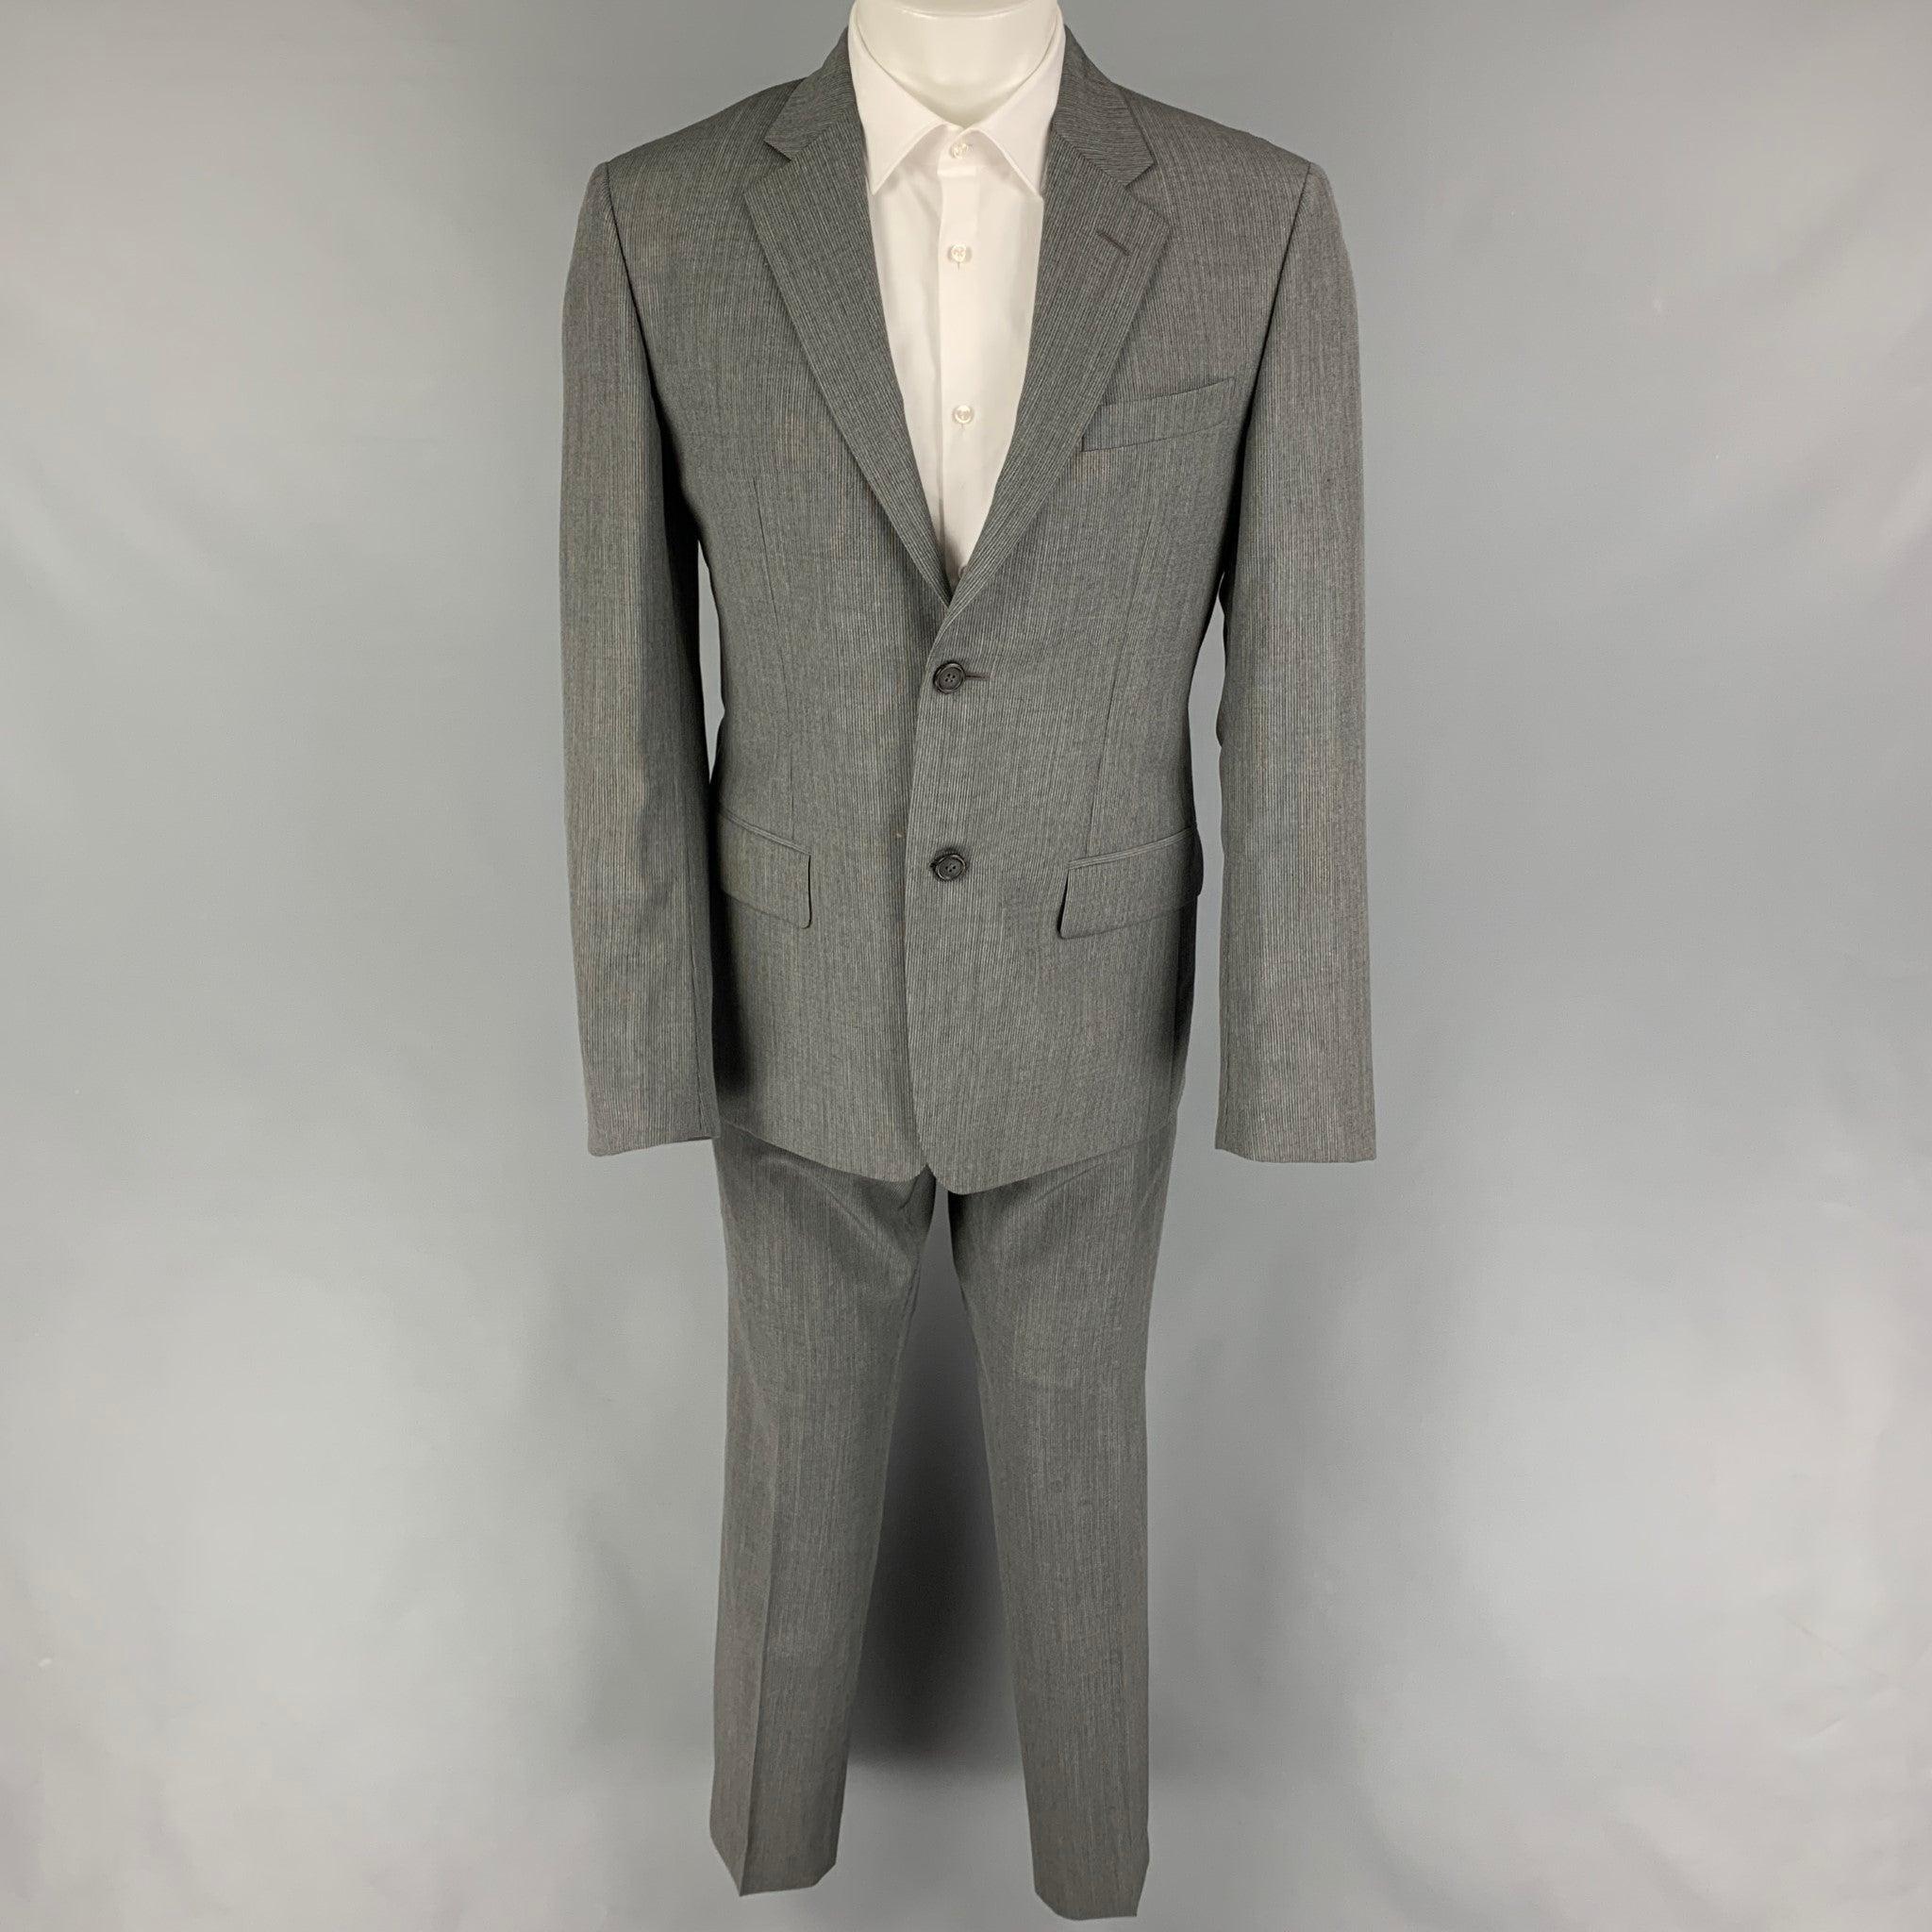 PRADA
suit comes in grey & silk pinstripe virgin wool and includes a single breasted, double button sport coat with a notch lapel and matching flat front trousers. Made in Italy. Very Good Pre-Owned Condition. 

Marked:   50 R  

Measurements: 
 